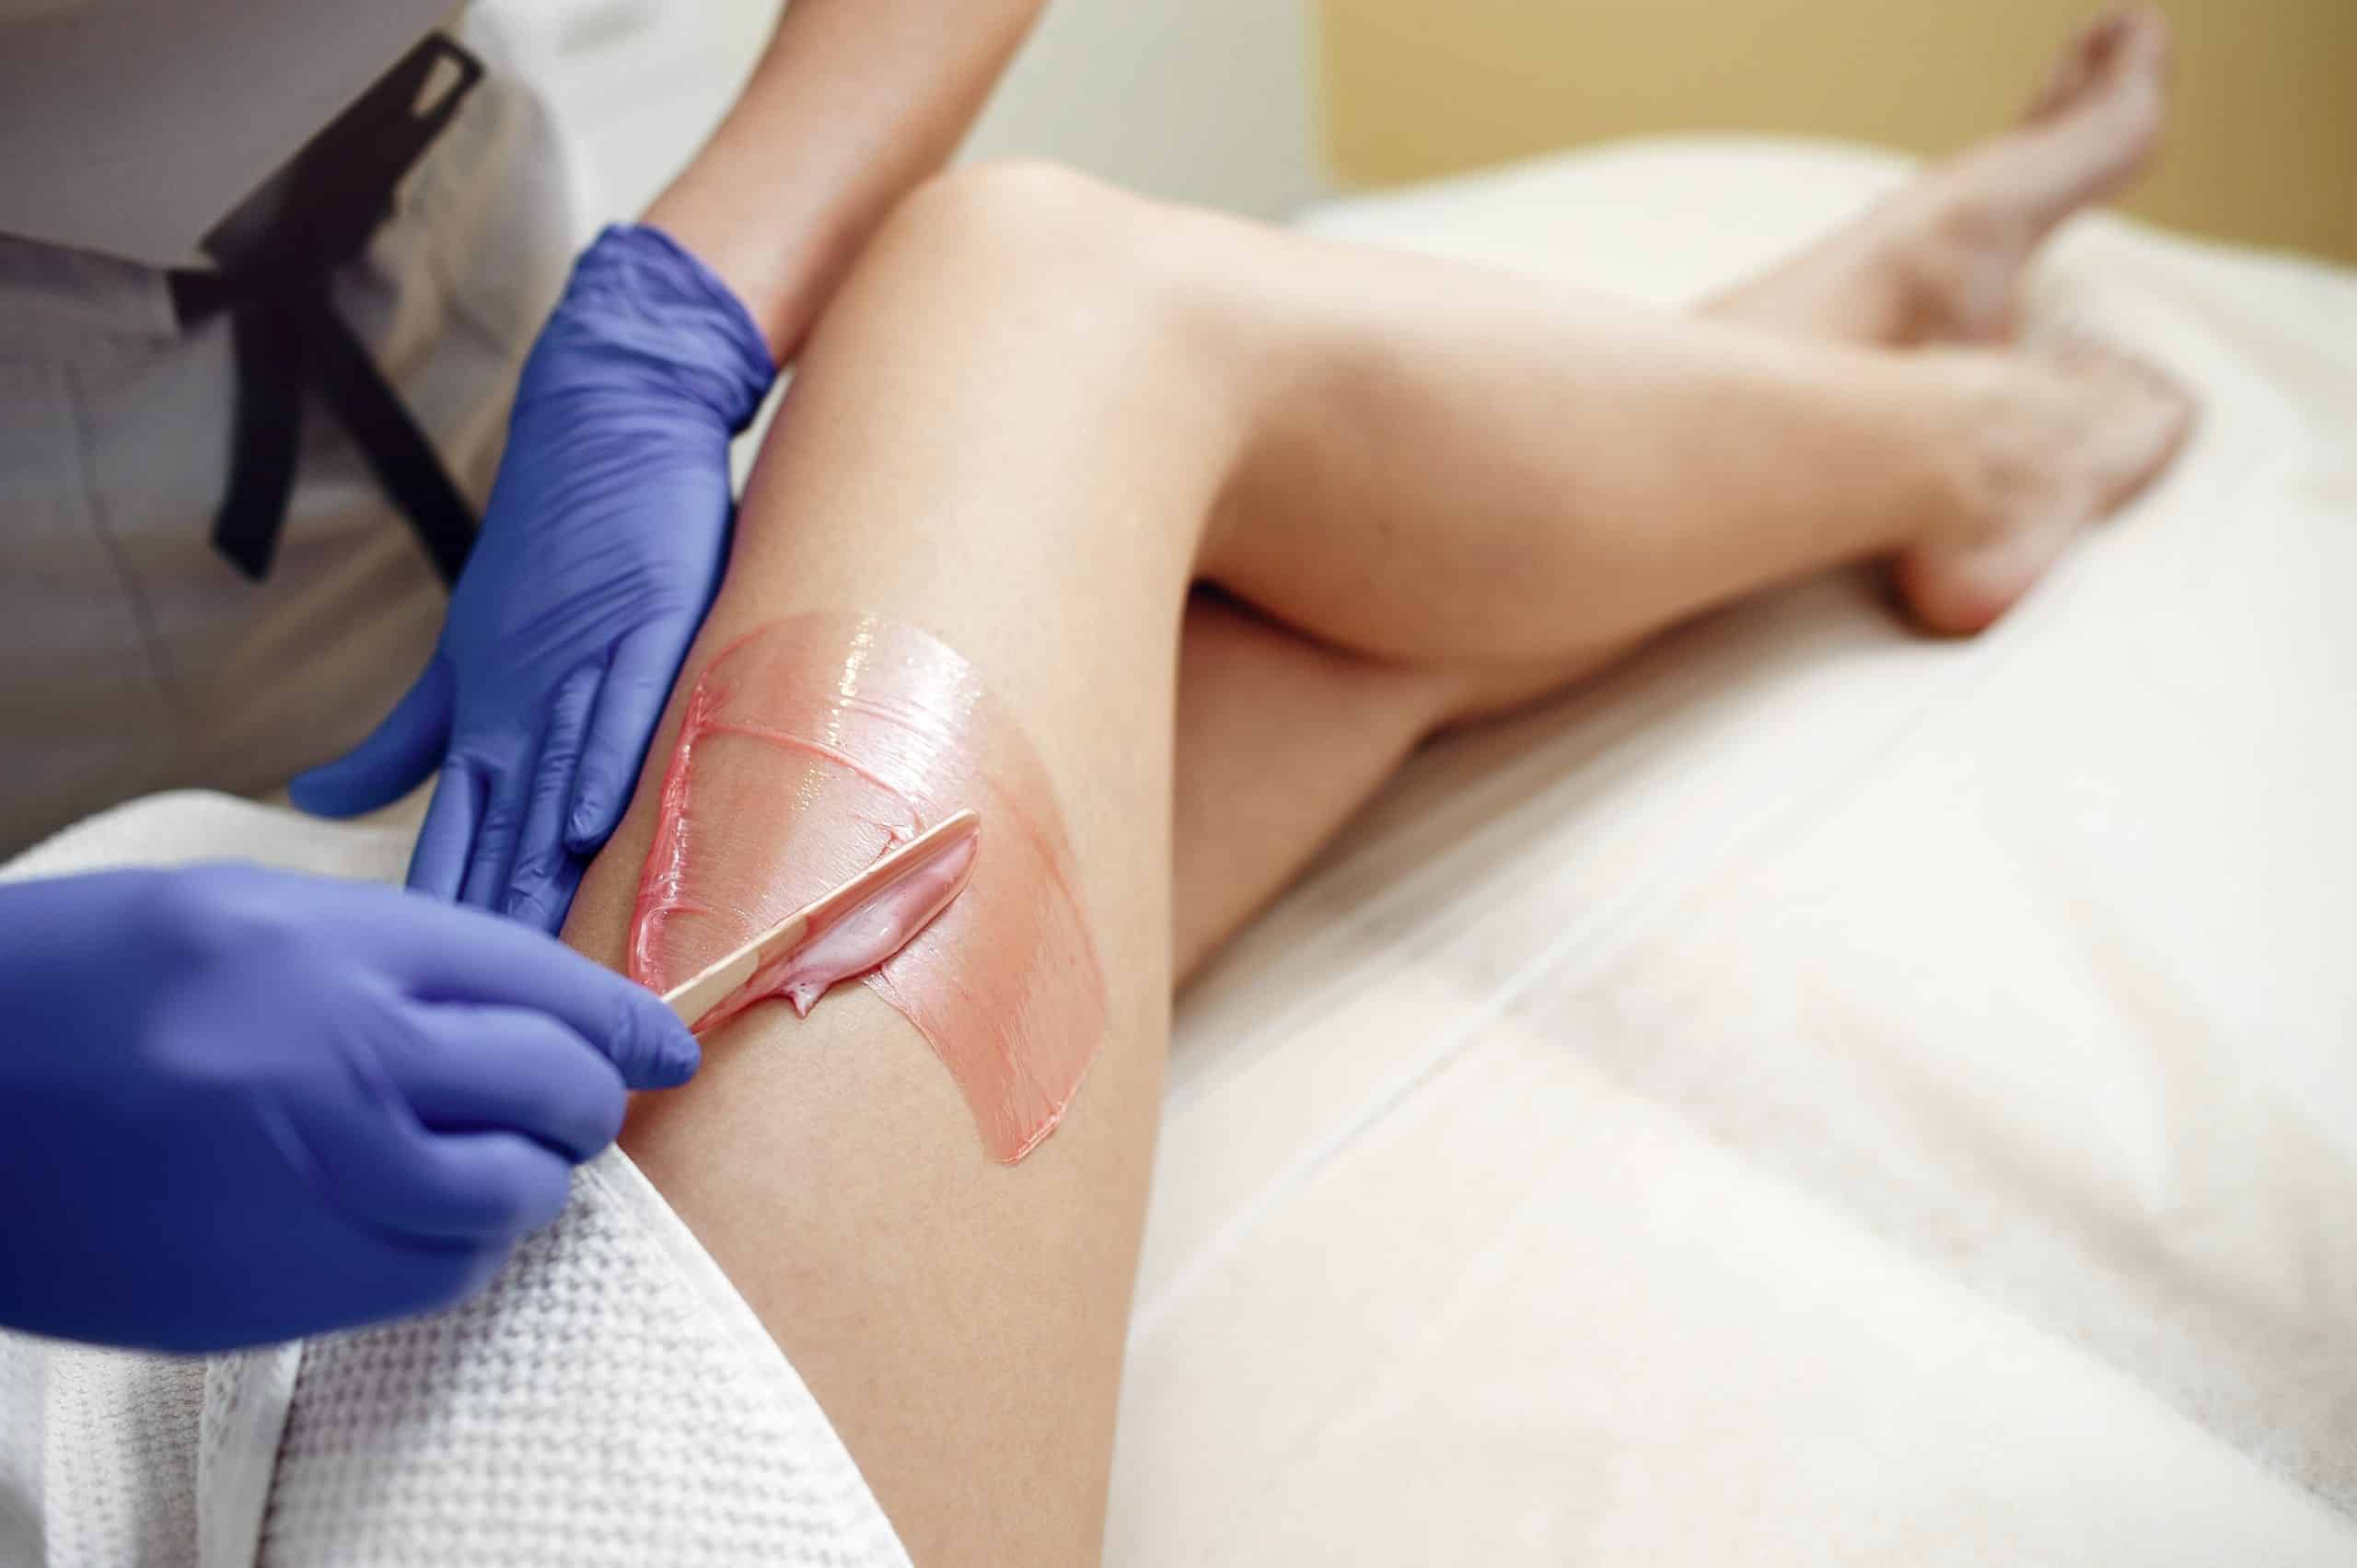 Girl getting Hair Removal by waxing creams